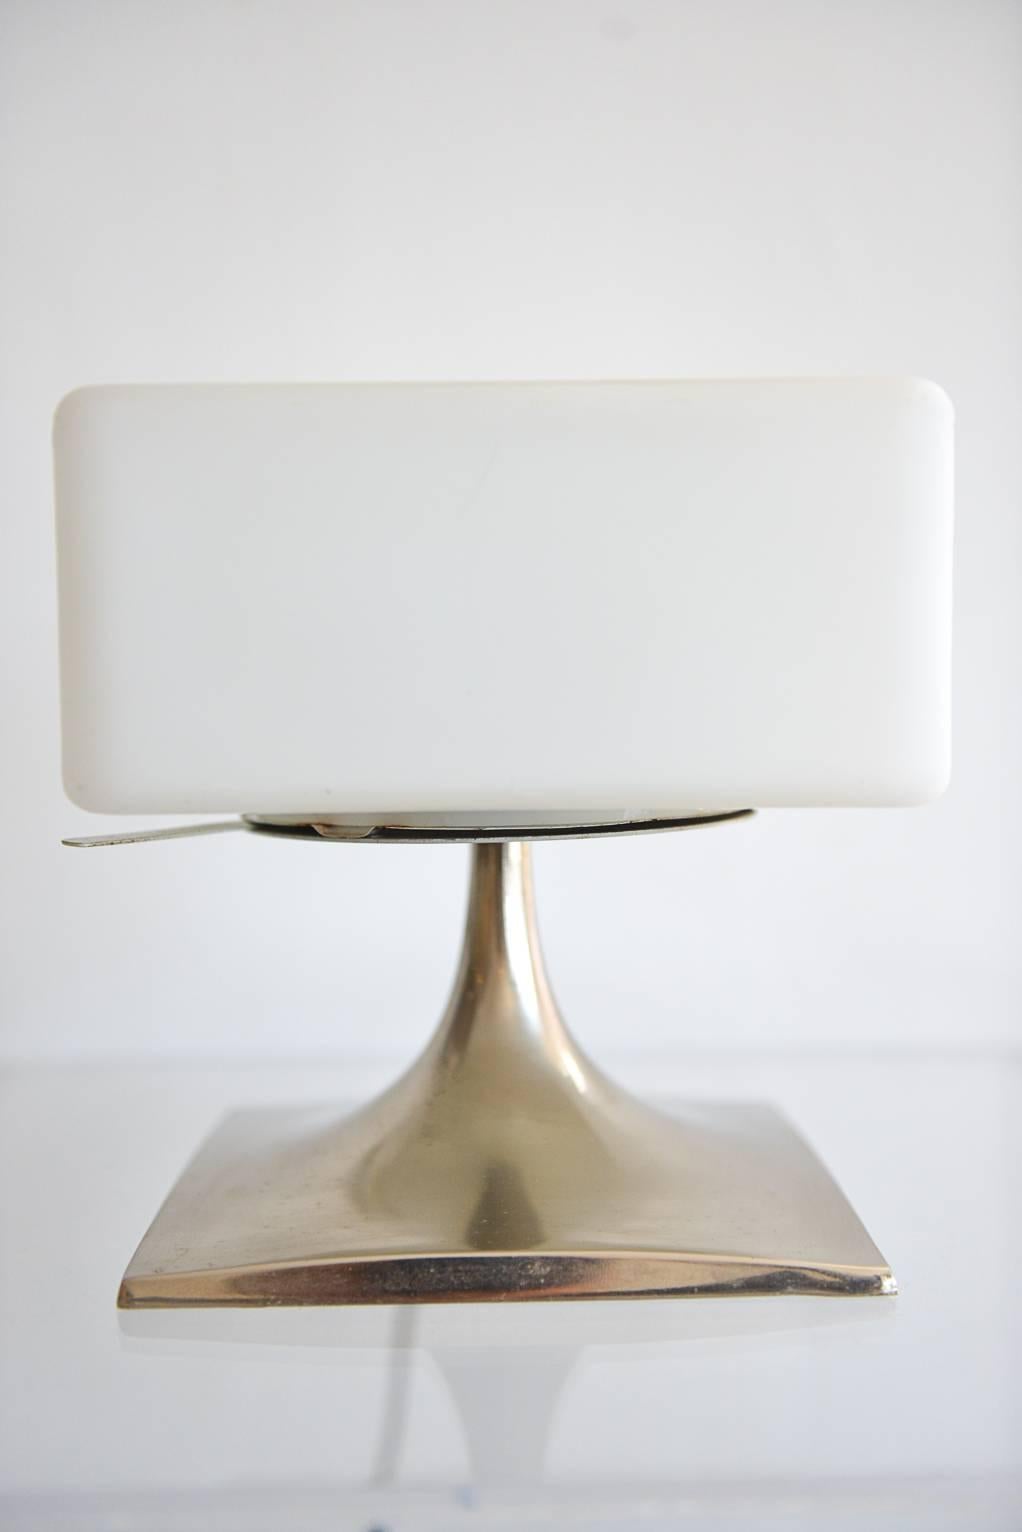 Beautiful rare square Italian glass shade Laurel Lamp, model 6083 with original wiring and stickers. Very good vintage condition, base has very slight patina, as shown and original glass shade is perfect. Beautiful opaque light and petite size for